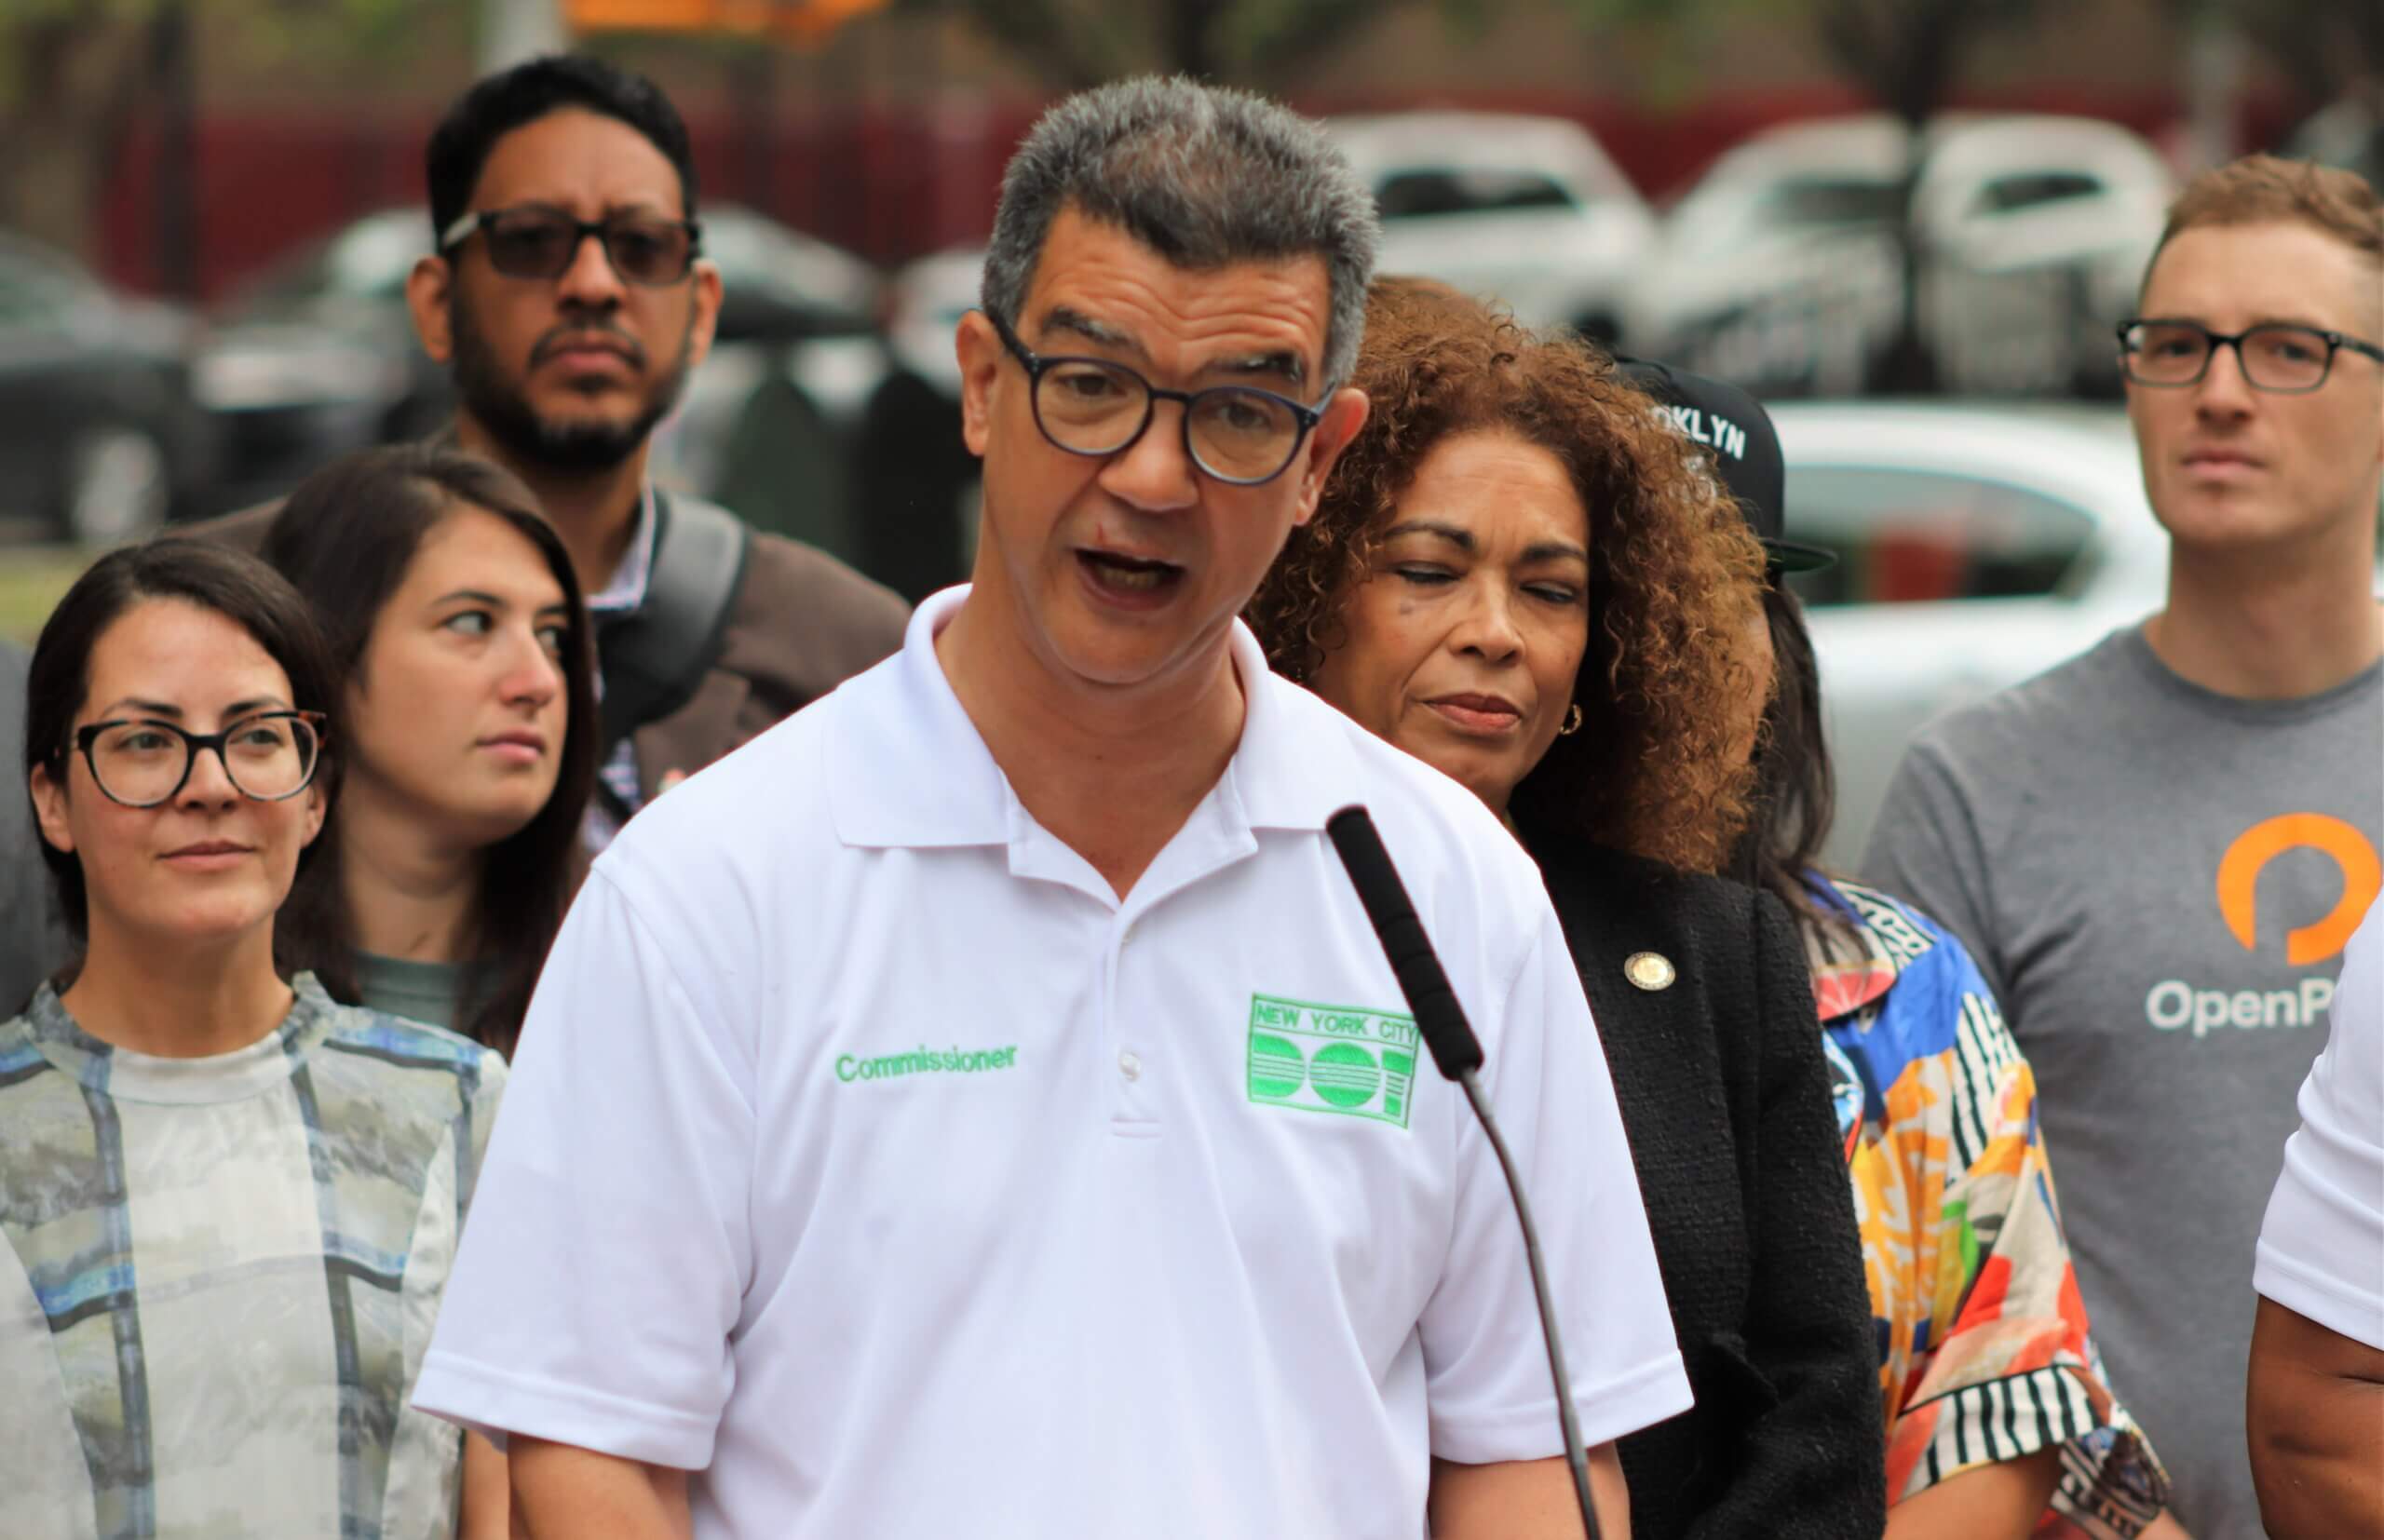 Mayor Adams, Dot Commissioner Rodriguez in Queens to Announce “Summer Streets” To All Five Boroughs (Photo by Michael Dorgan)